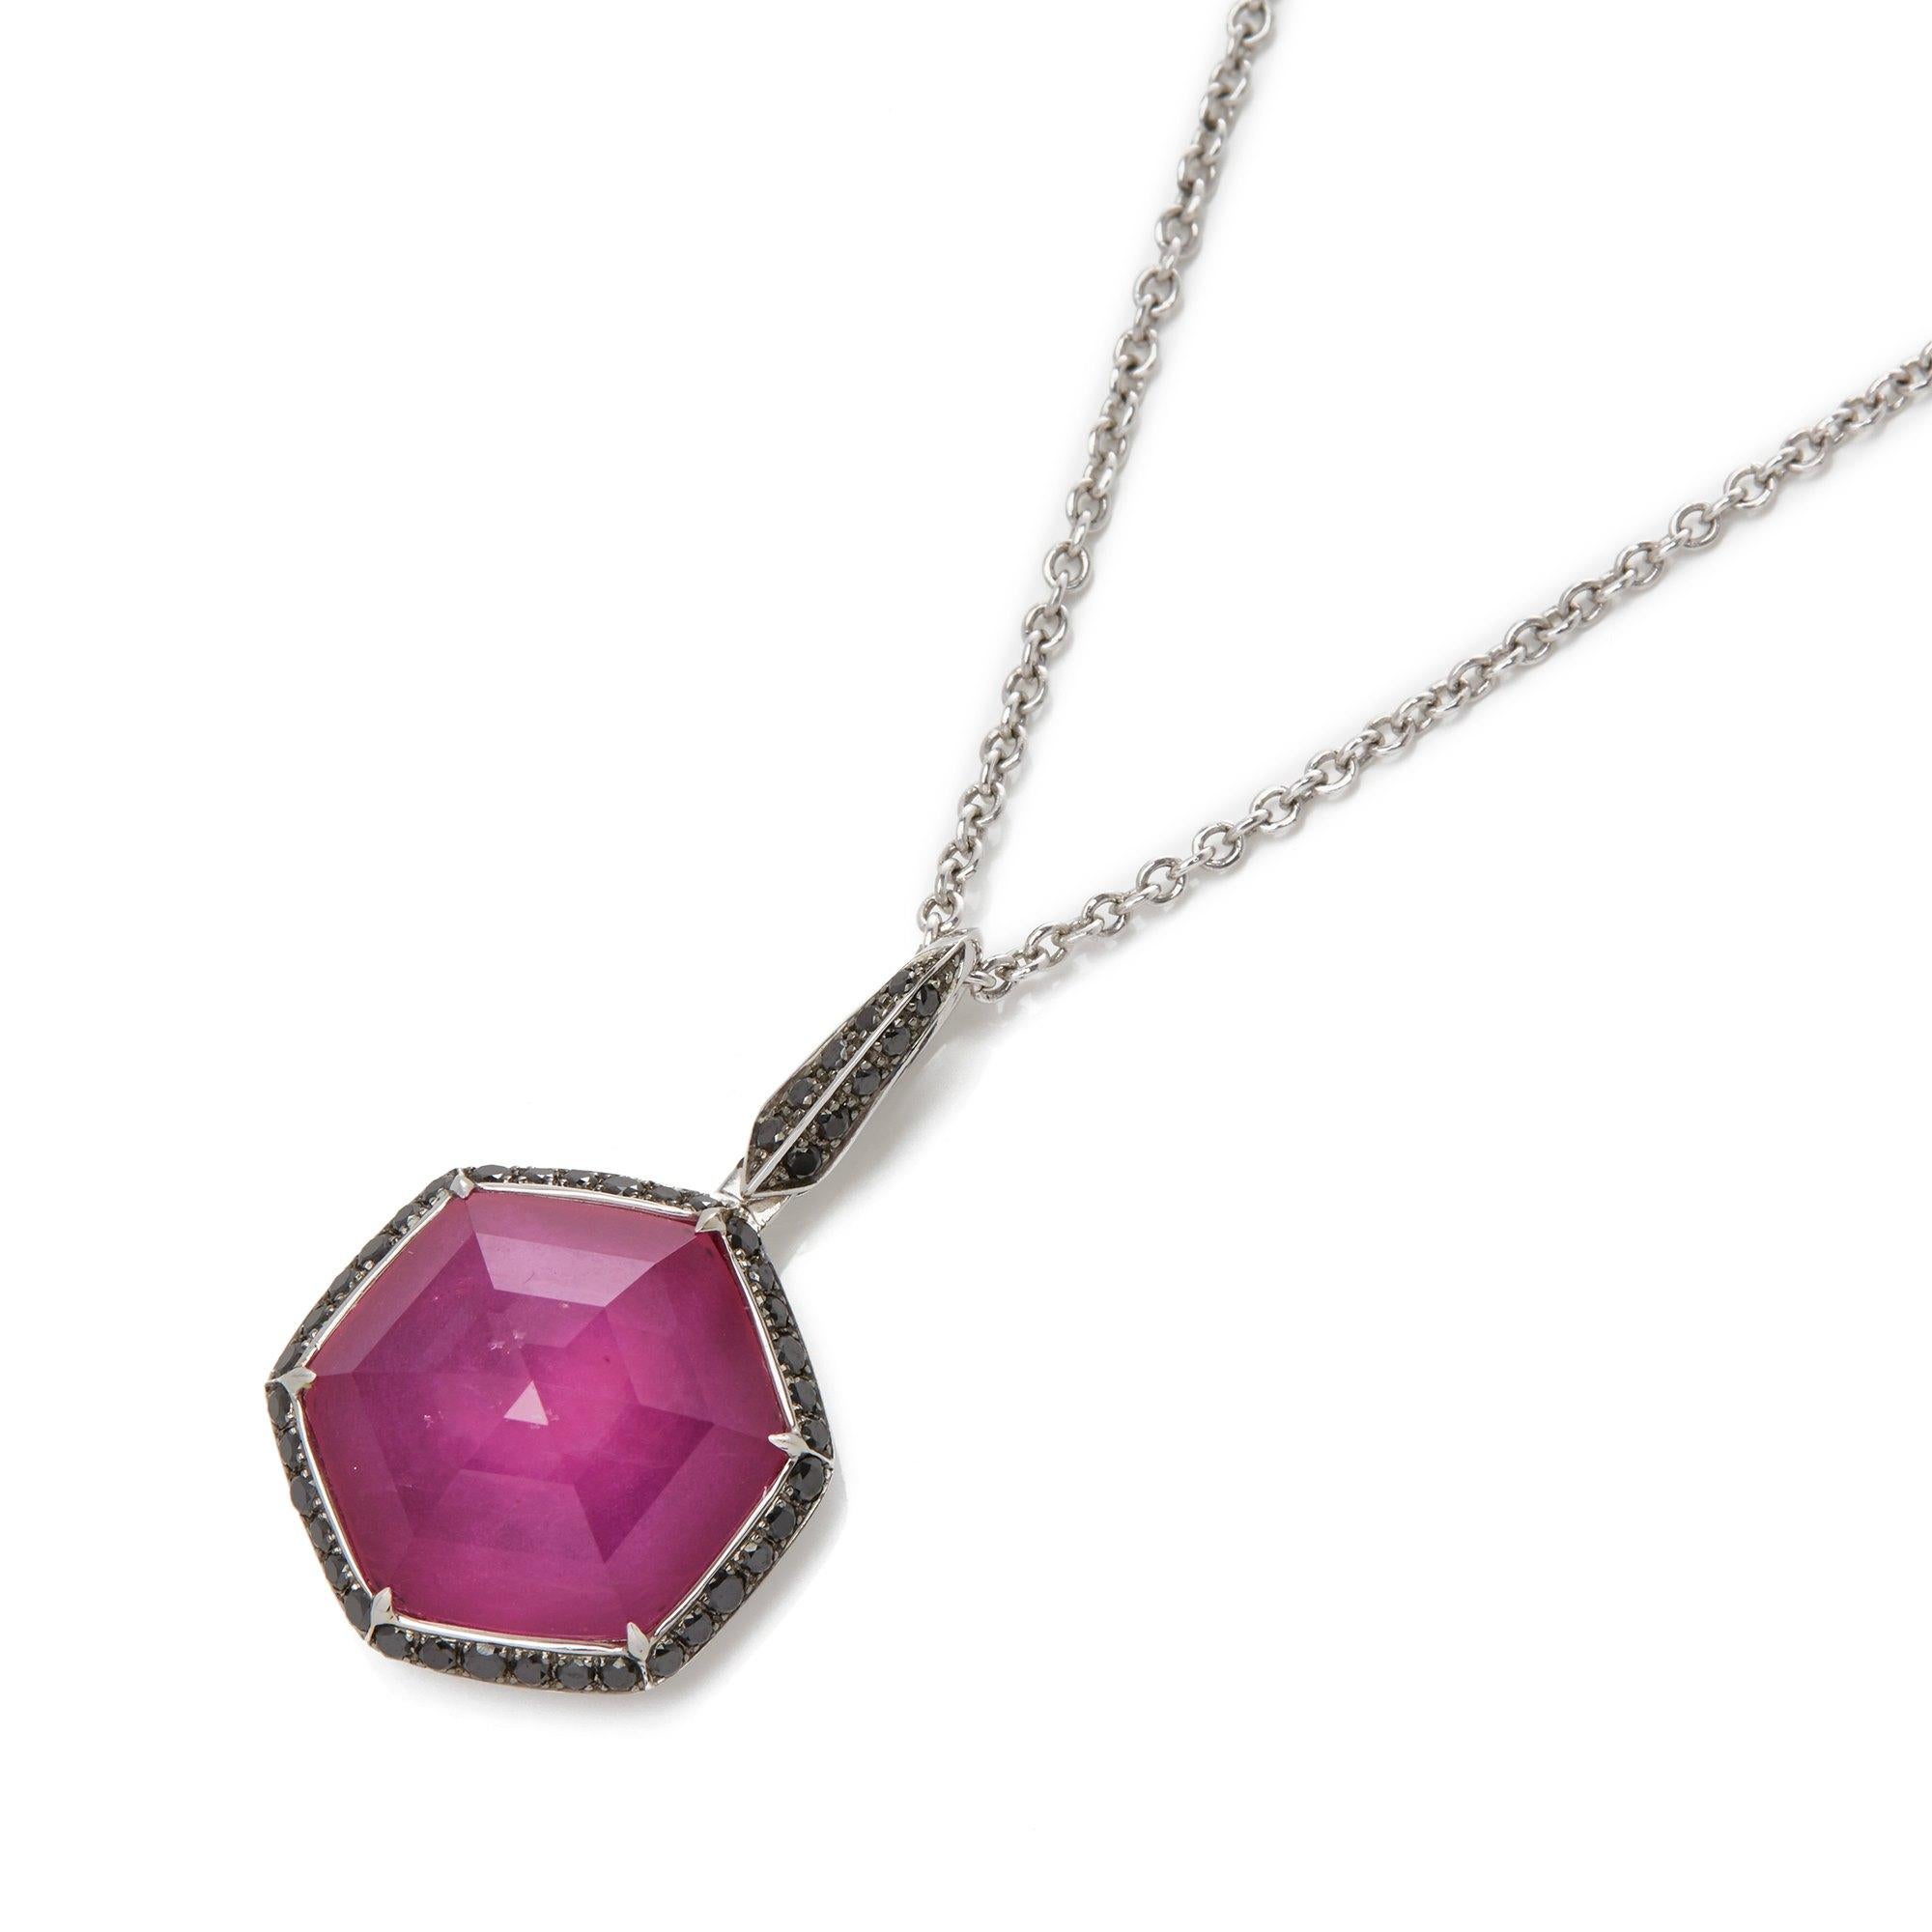 This pendant by Stephen Webster is from his Deco Haze Collection and features a ruby quartz measuring 10.43ct and black diamond pendant. Set in white gold and complemented by a white gold trace chain. 